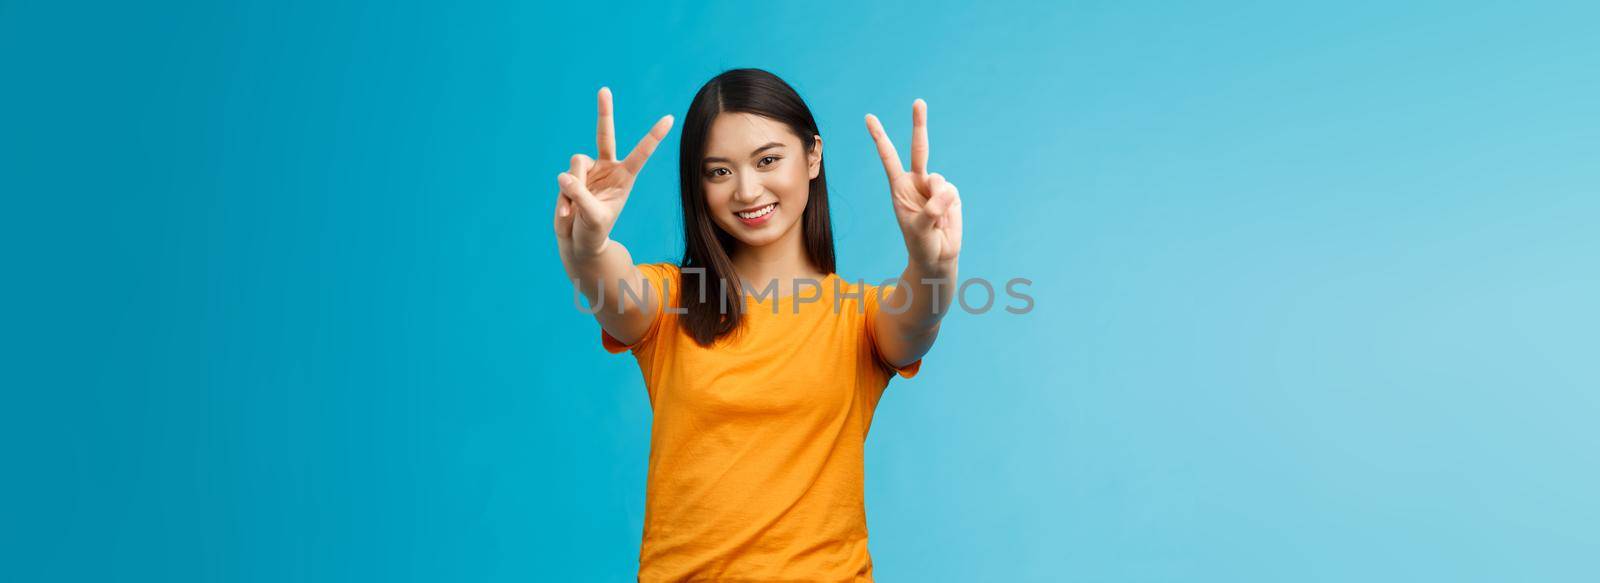 Positive upbeat cute asian girl believe win, aim success extend hands show victory, peace sign smiling broadly, have happy enthusiastic mood, spend carefree vacation travel abroad value pacifism.